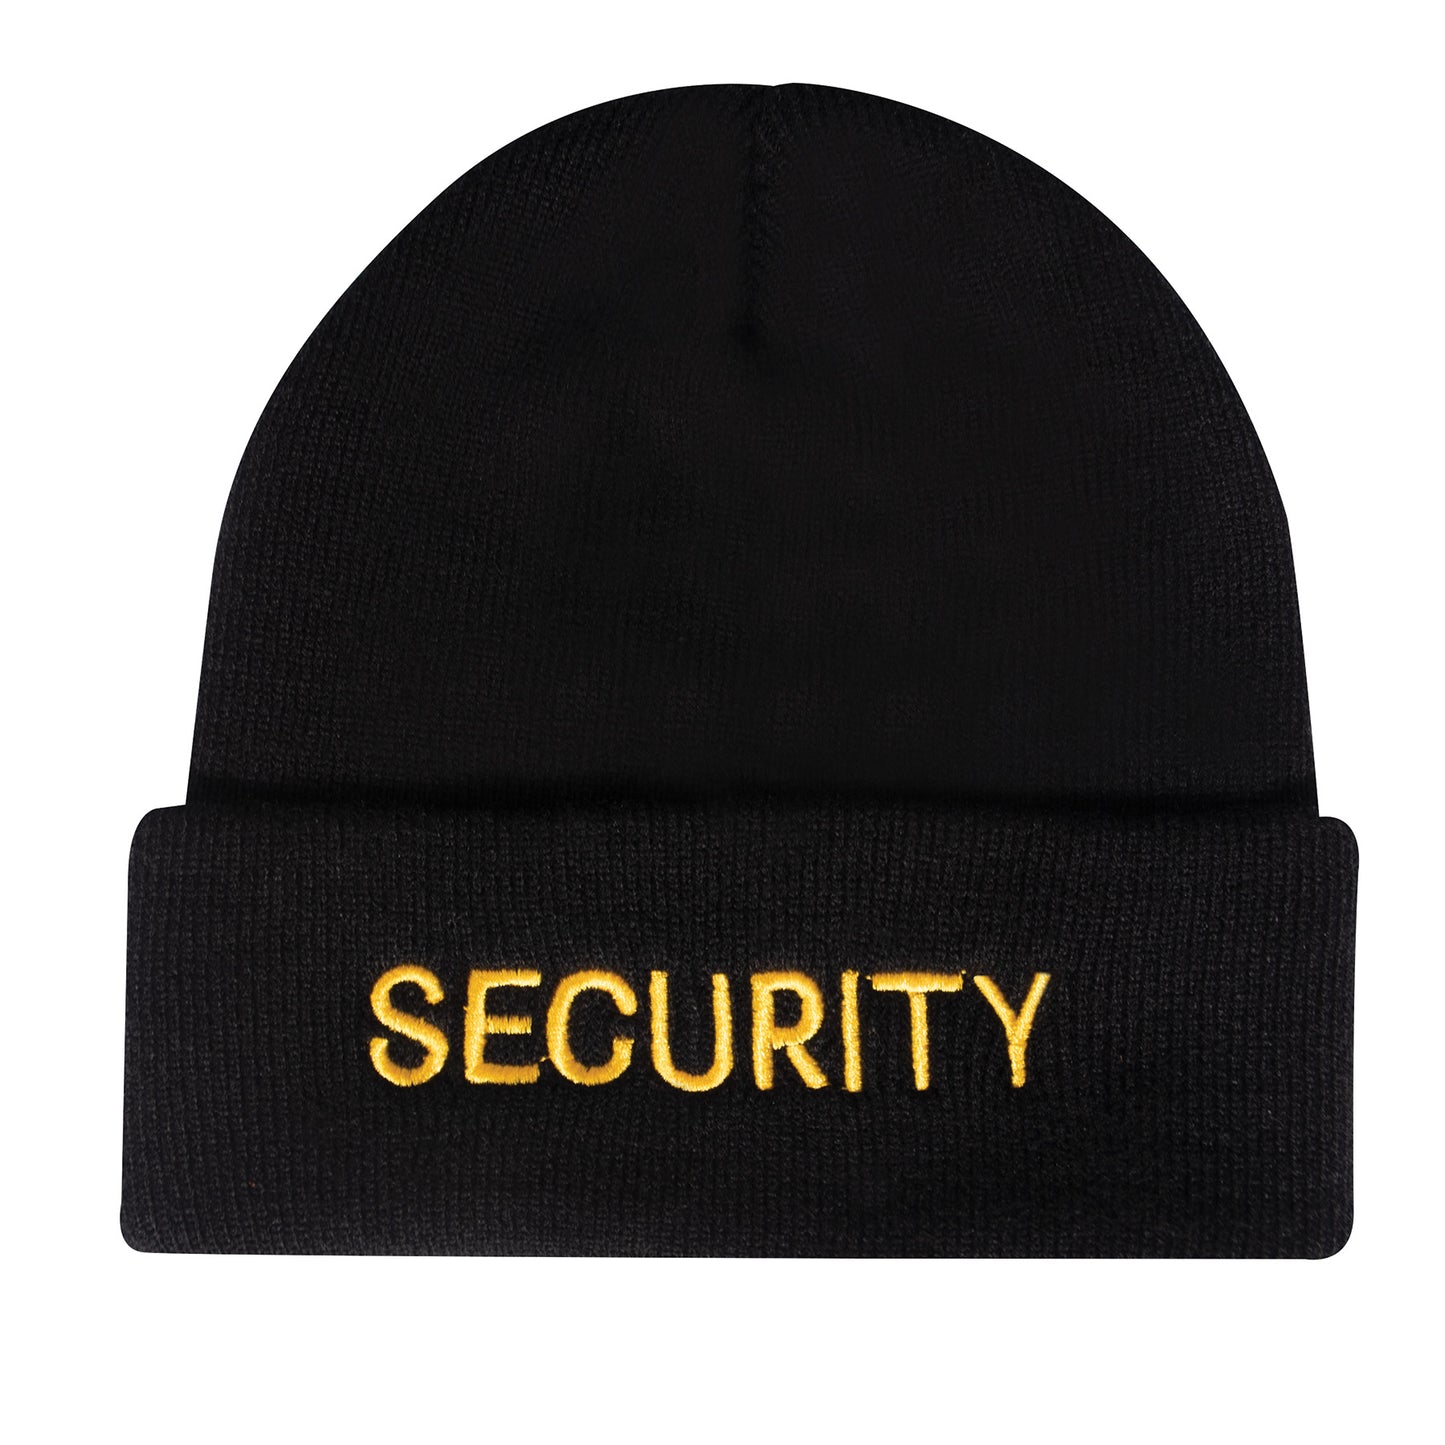 Embroidered Security Watch Cap - Black & Gold